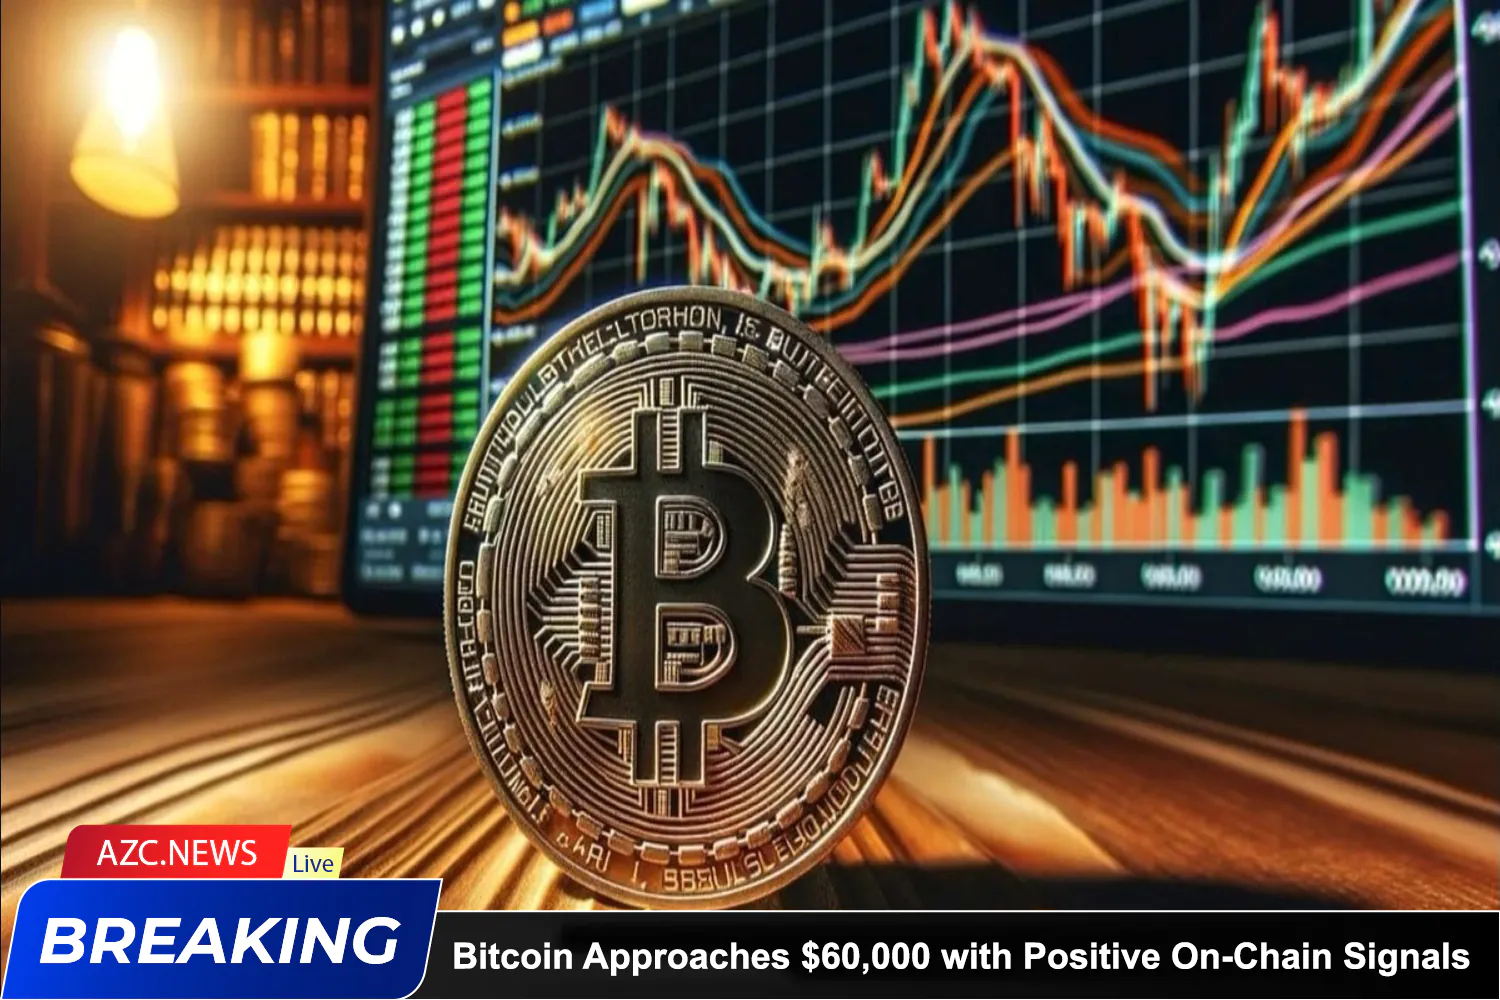 Azcnews Bitcoin Approaches $60,000 With Positive On Chain Signals